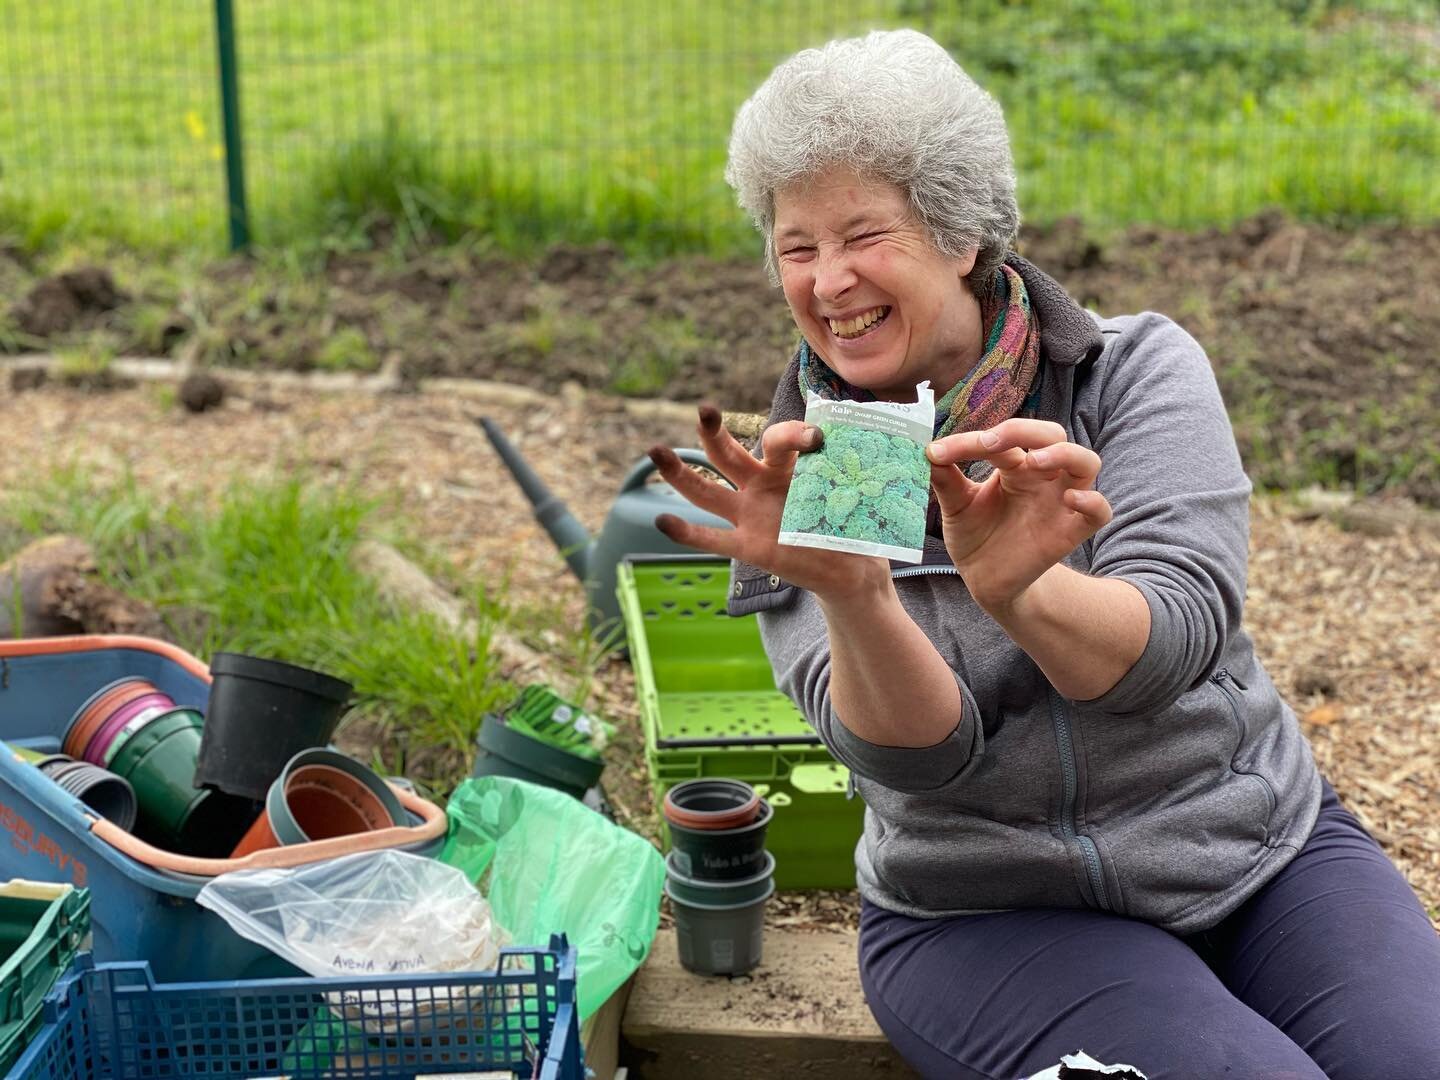 Meet Frankie! She is leading our garden group and is very excited about our planting!! If you want to join our group then just get in touch.